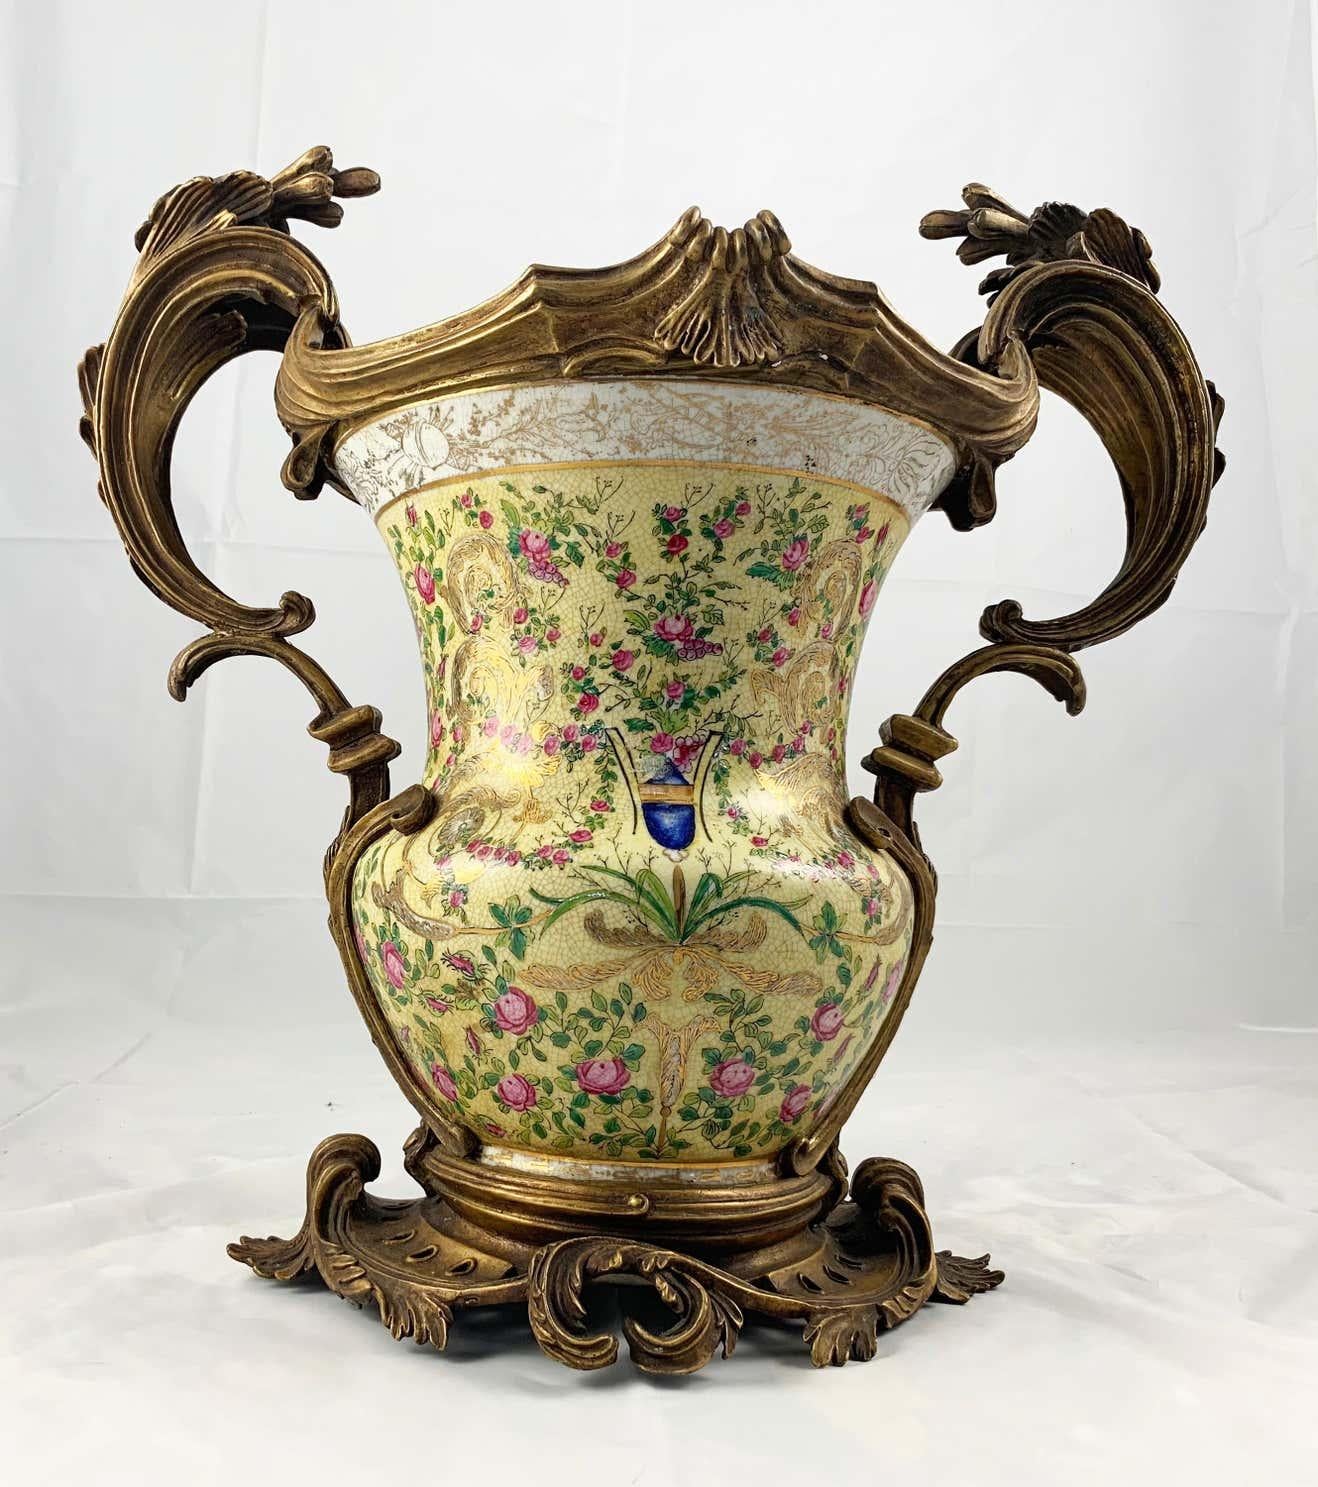 20th Century Pair of French Porcelain and Ormolu-Mounted Twin Handled Urns For Sale 2